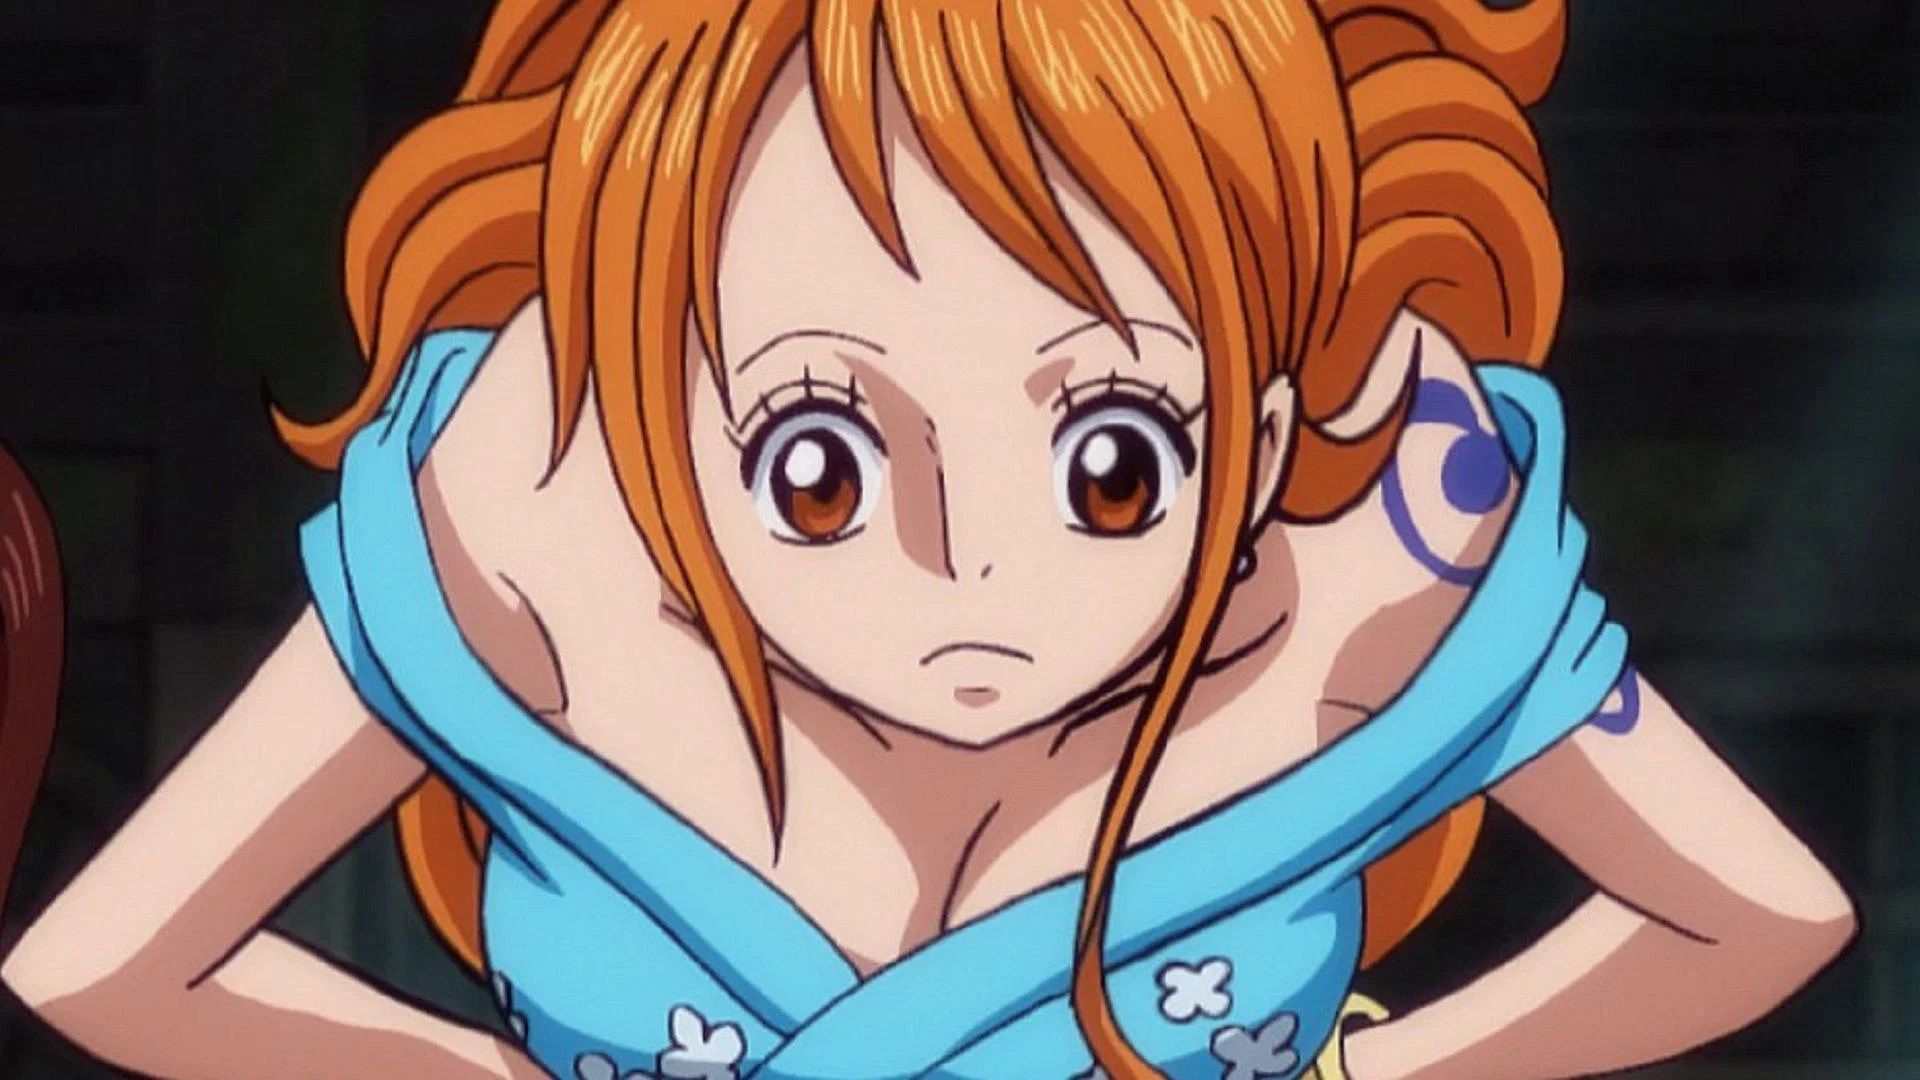 Nami has her hands on her hips while wearing a blue robe